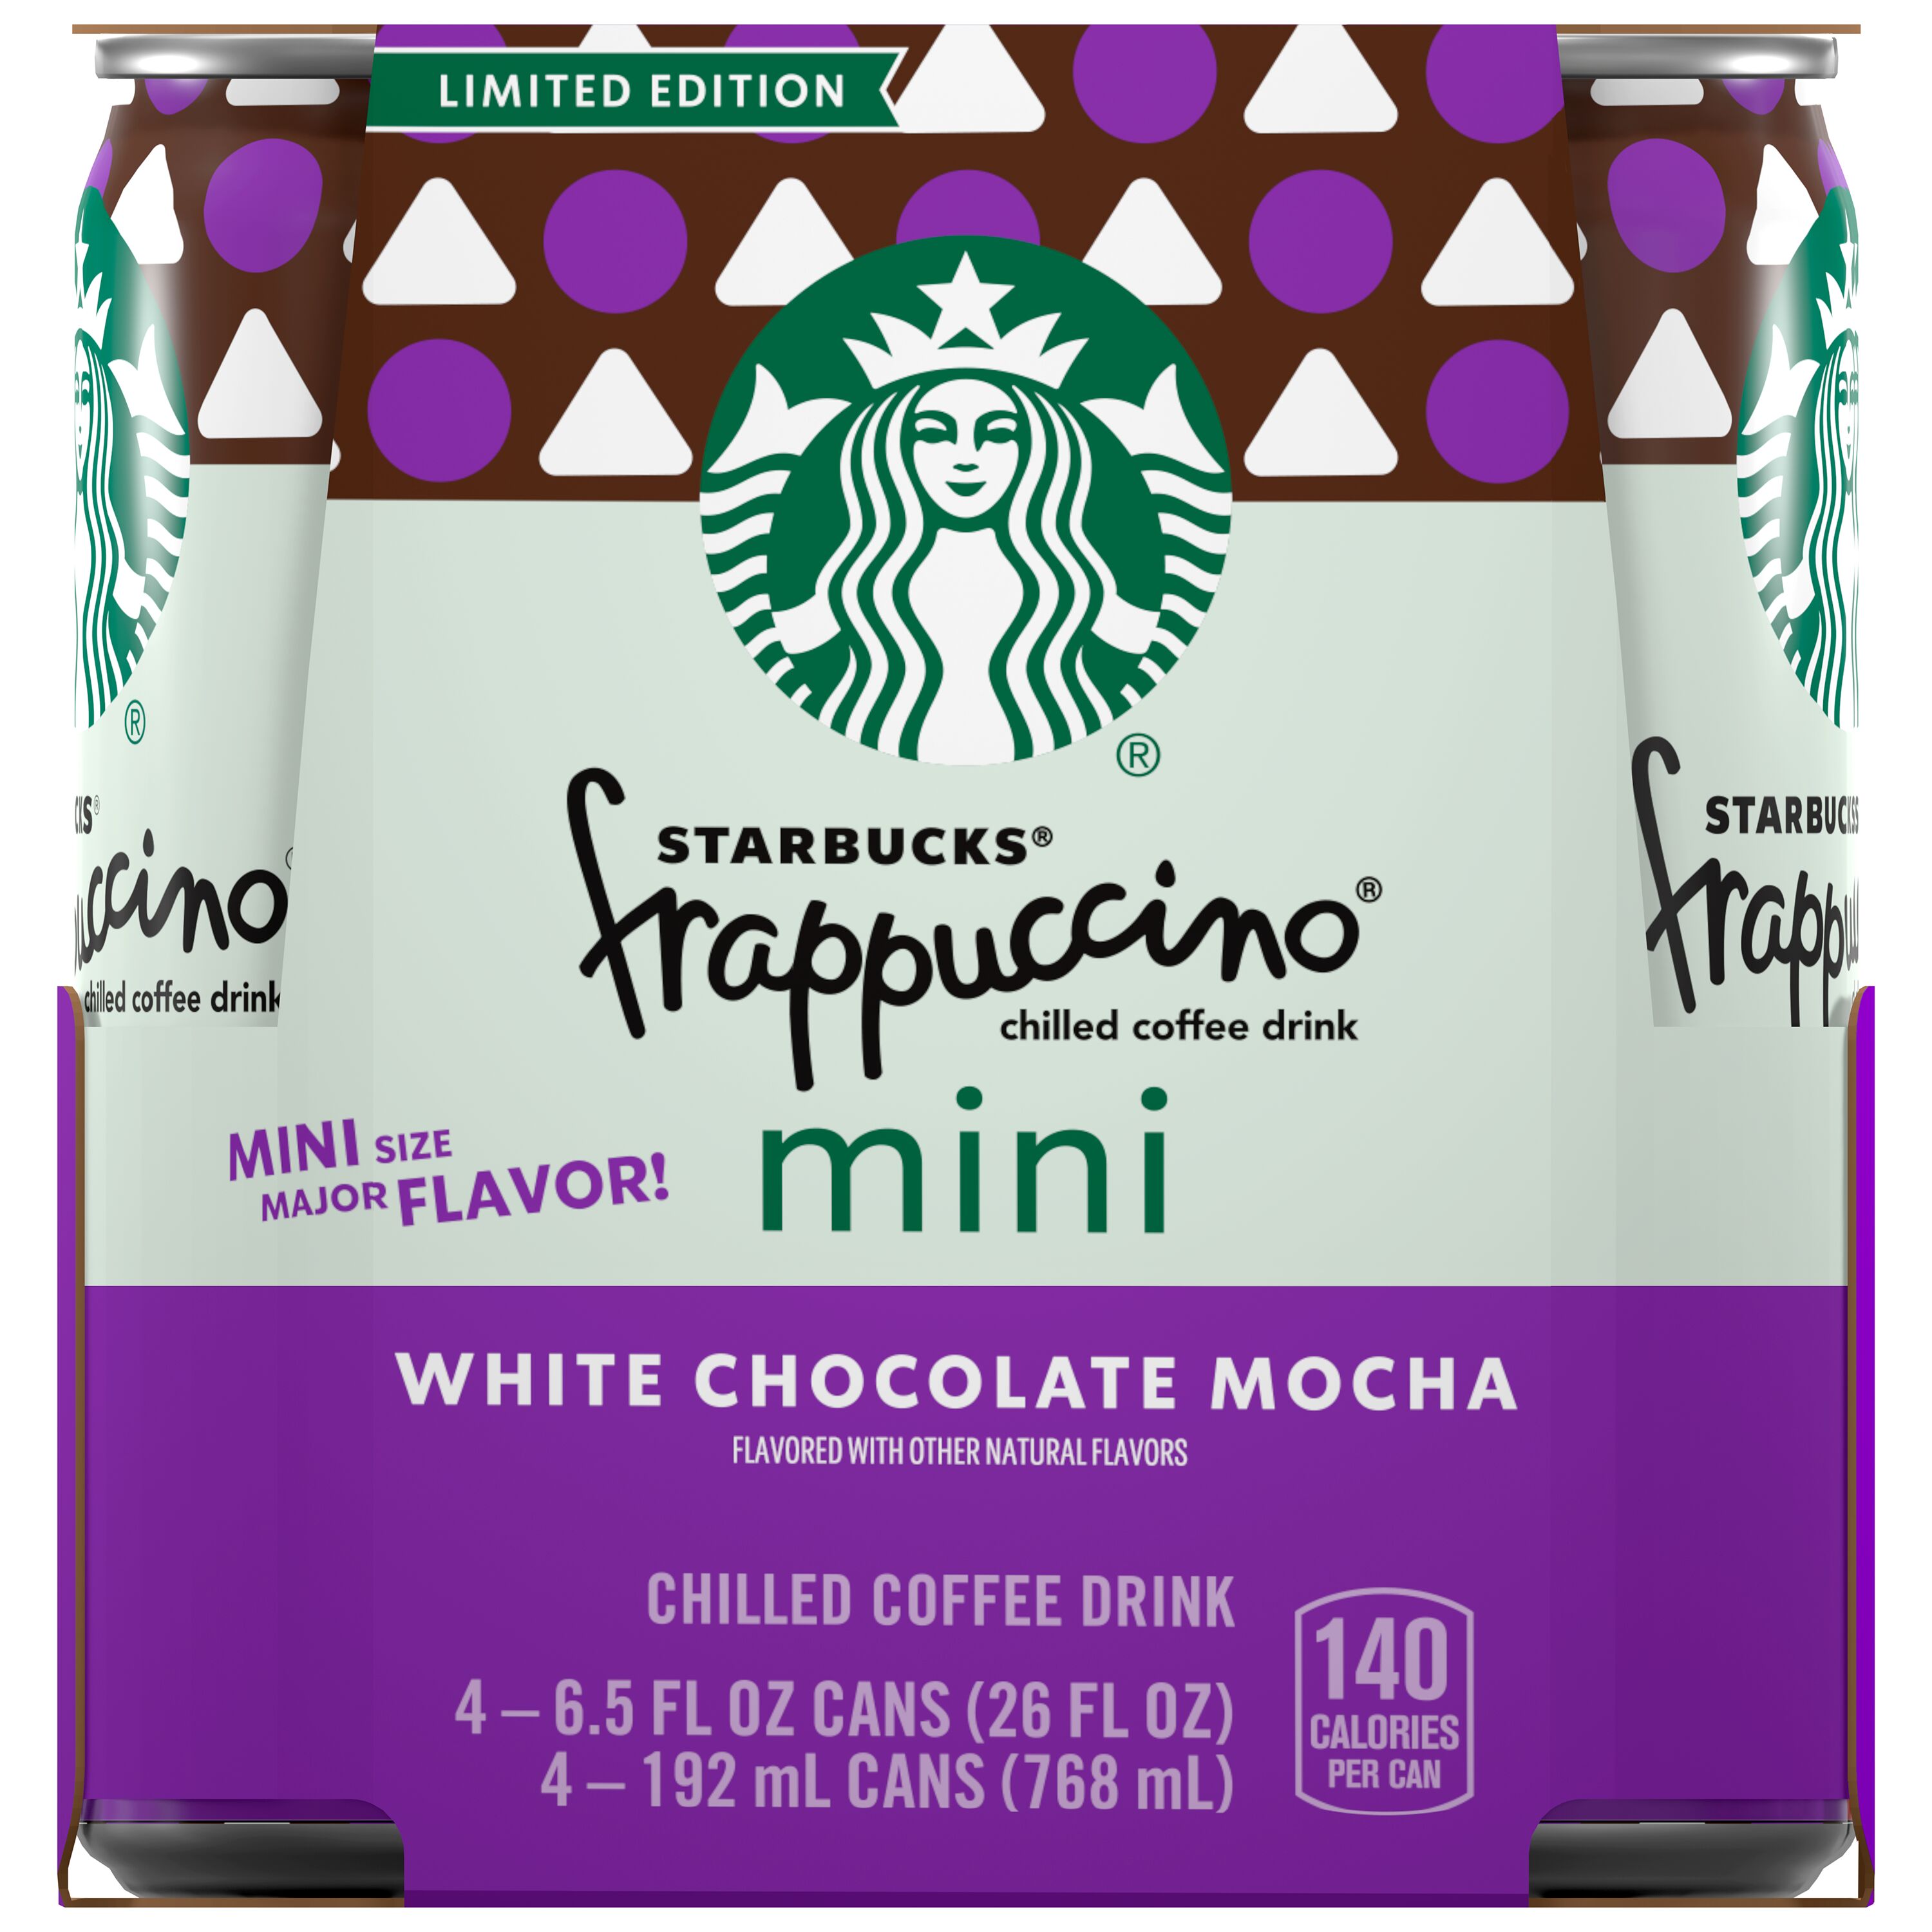 Starbucks Limited Edition Frappuccino White Chocolate Mocha Flavored Chilled Coffee Drink 6321